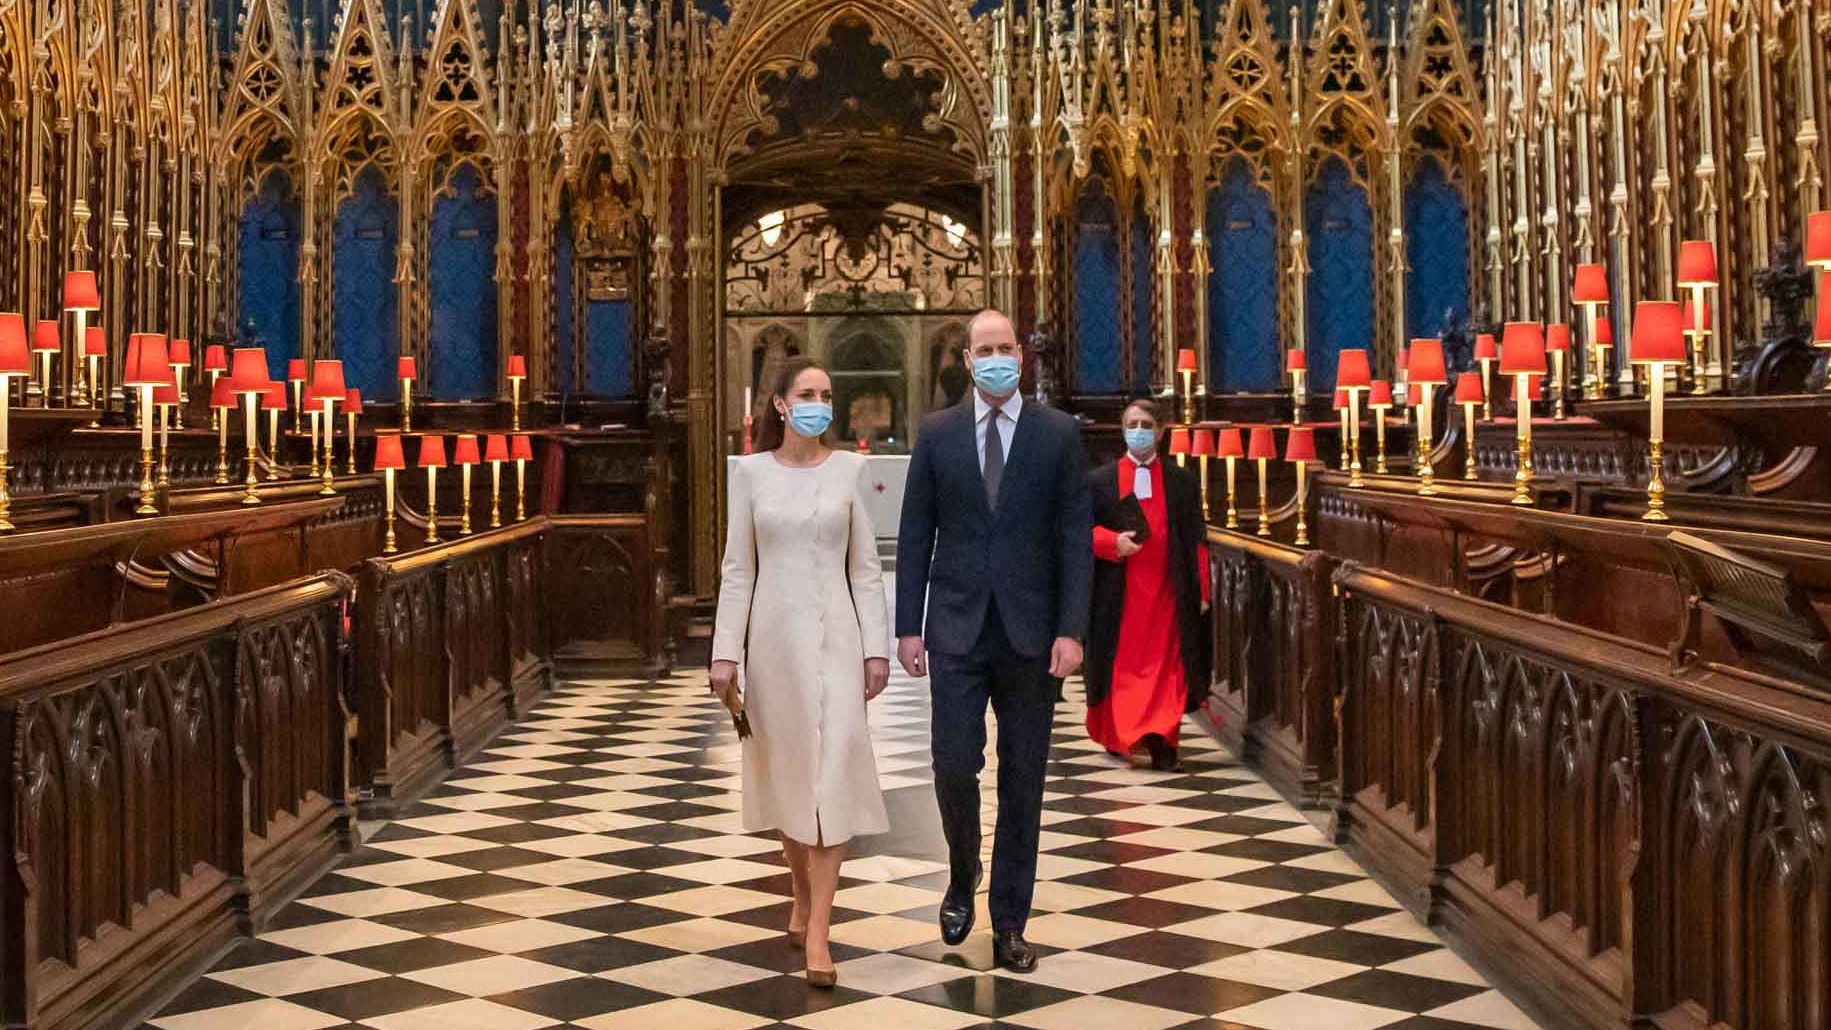 William and Catherine visit Westminster Abbey, where a Covid-19 vaccination center had been set up in London in March 2021.